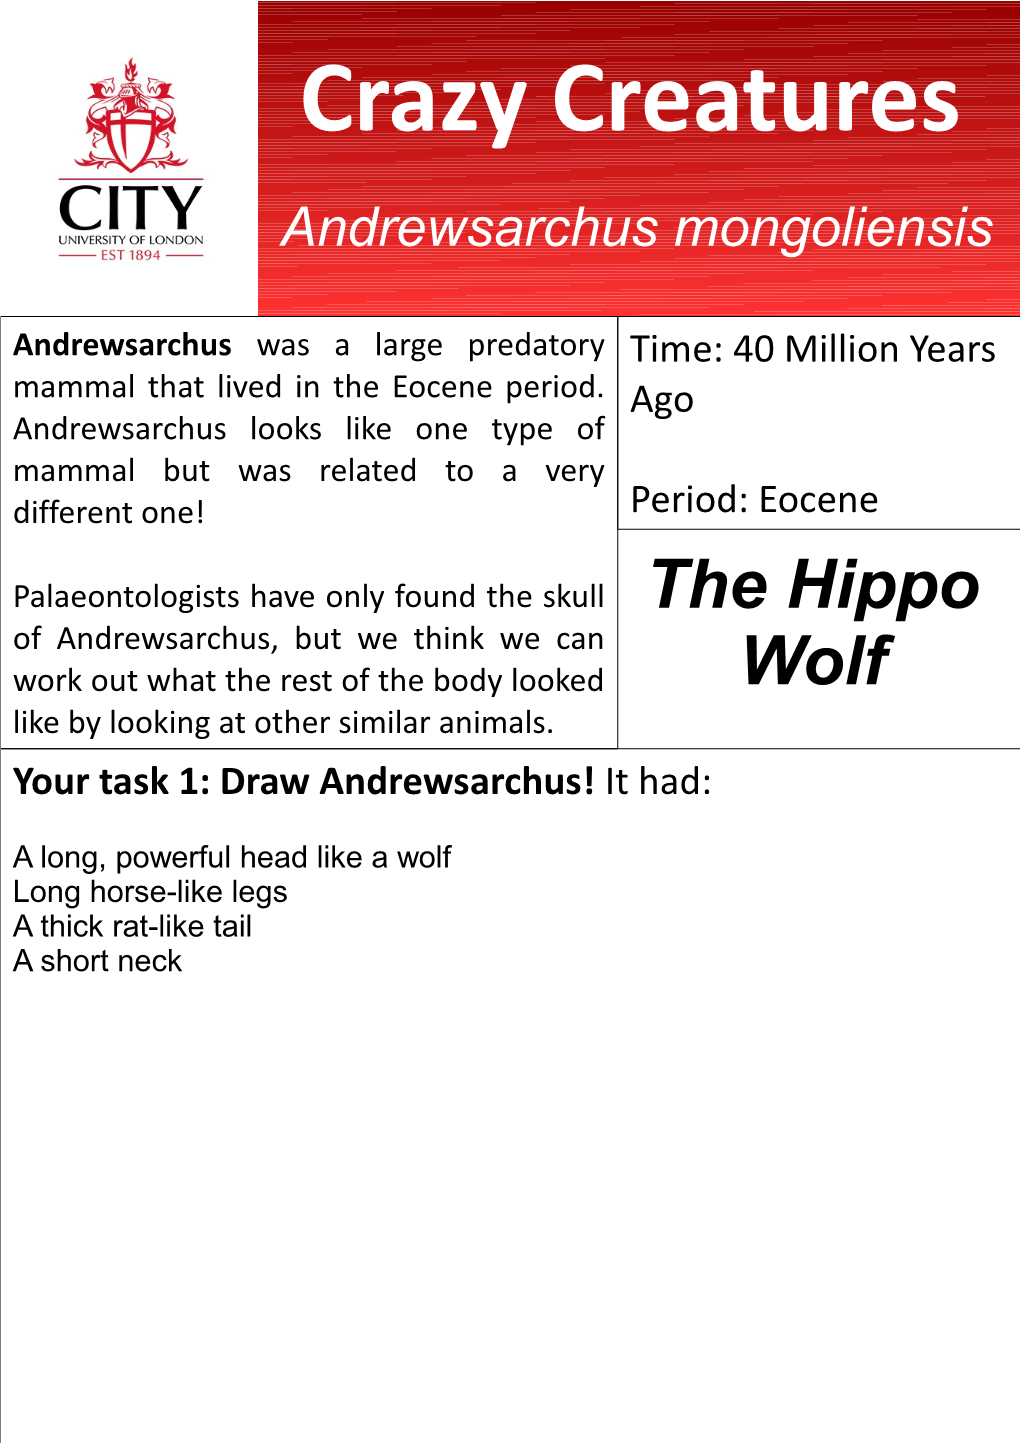 Andrewsarchus Mongoliensis